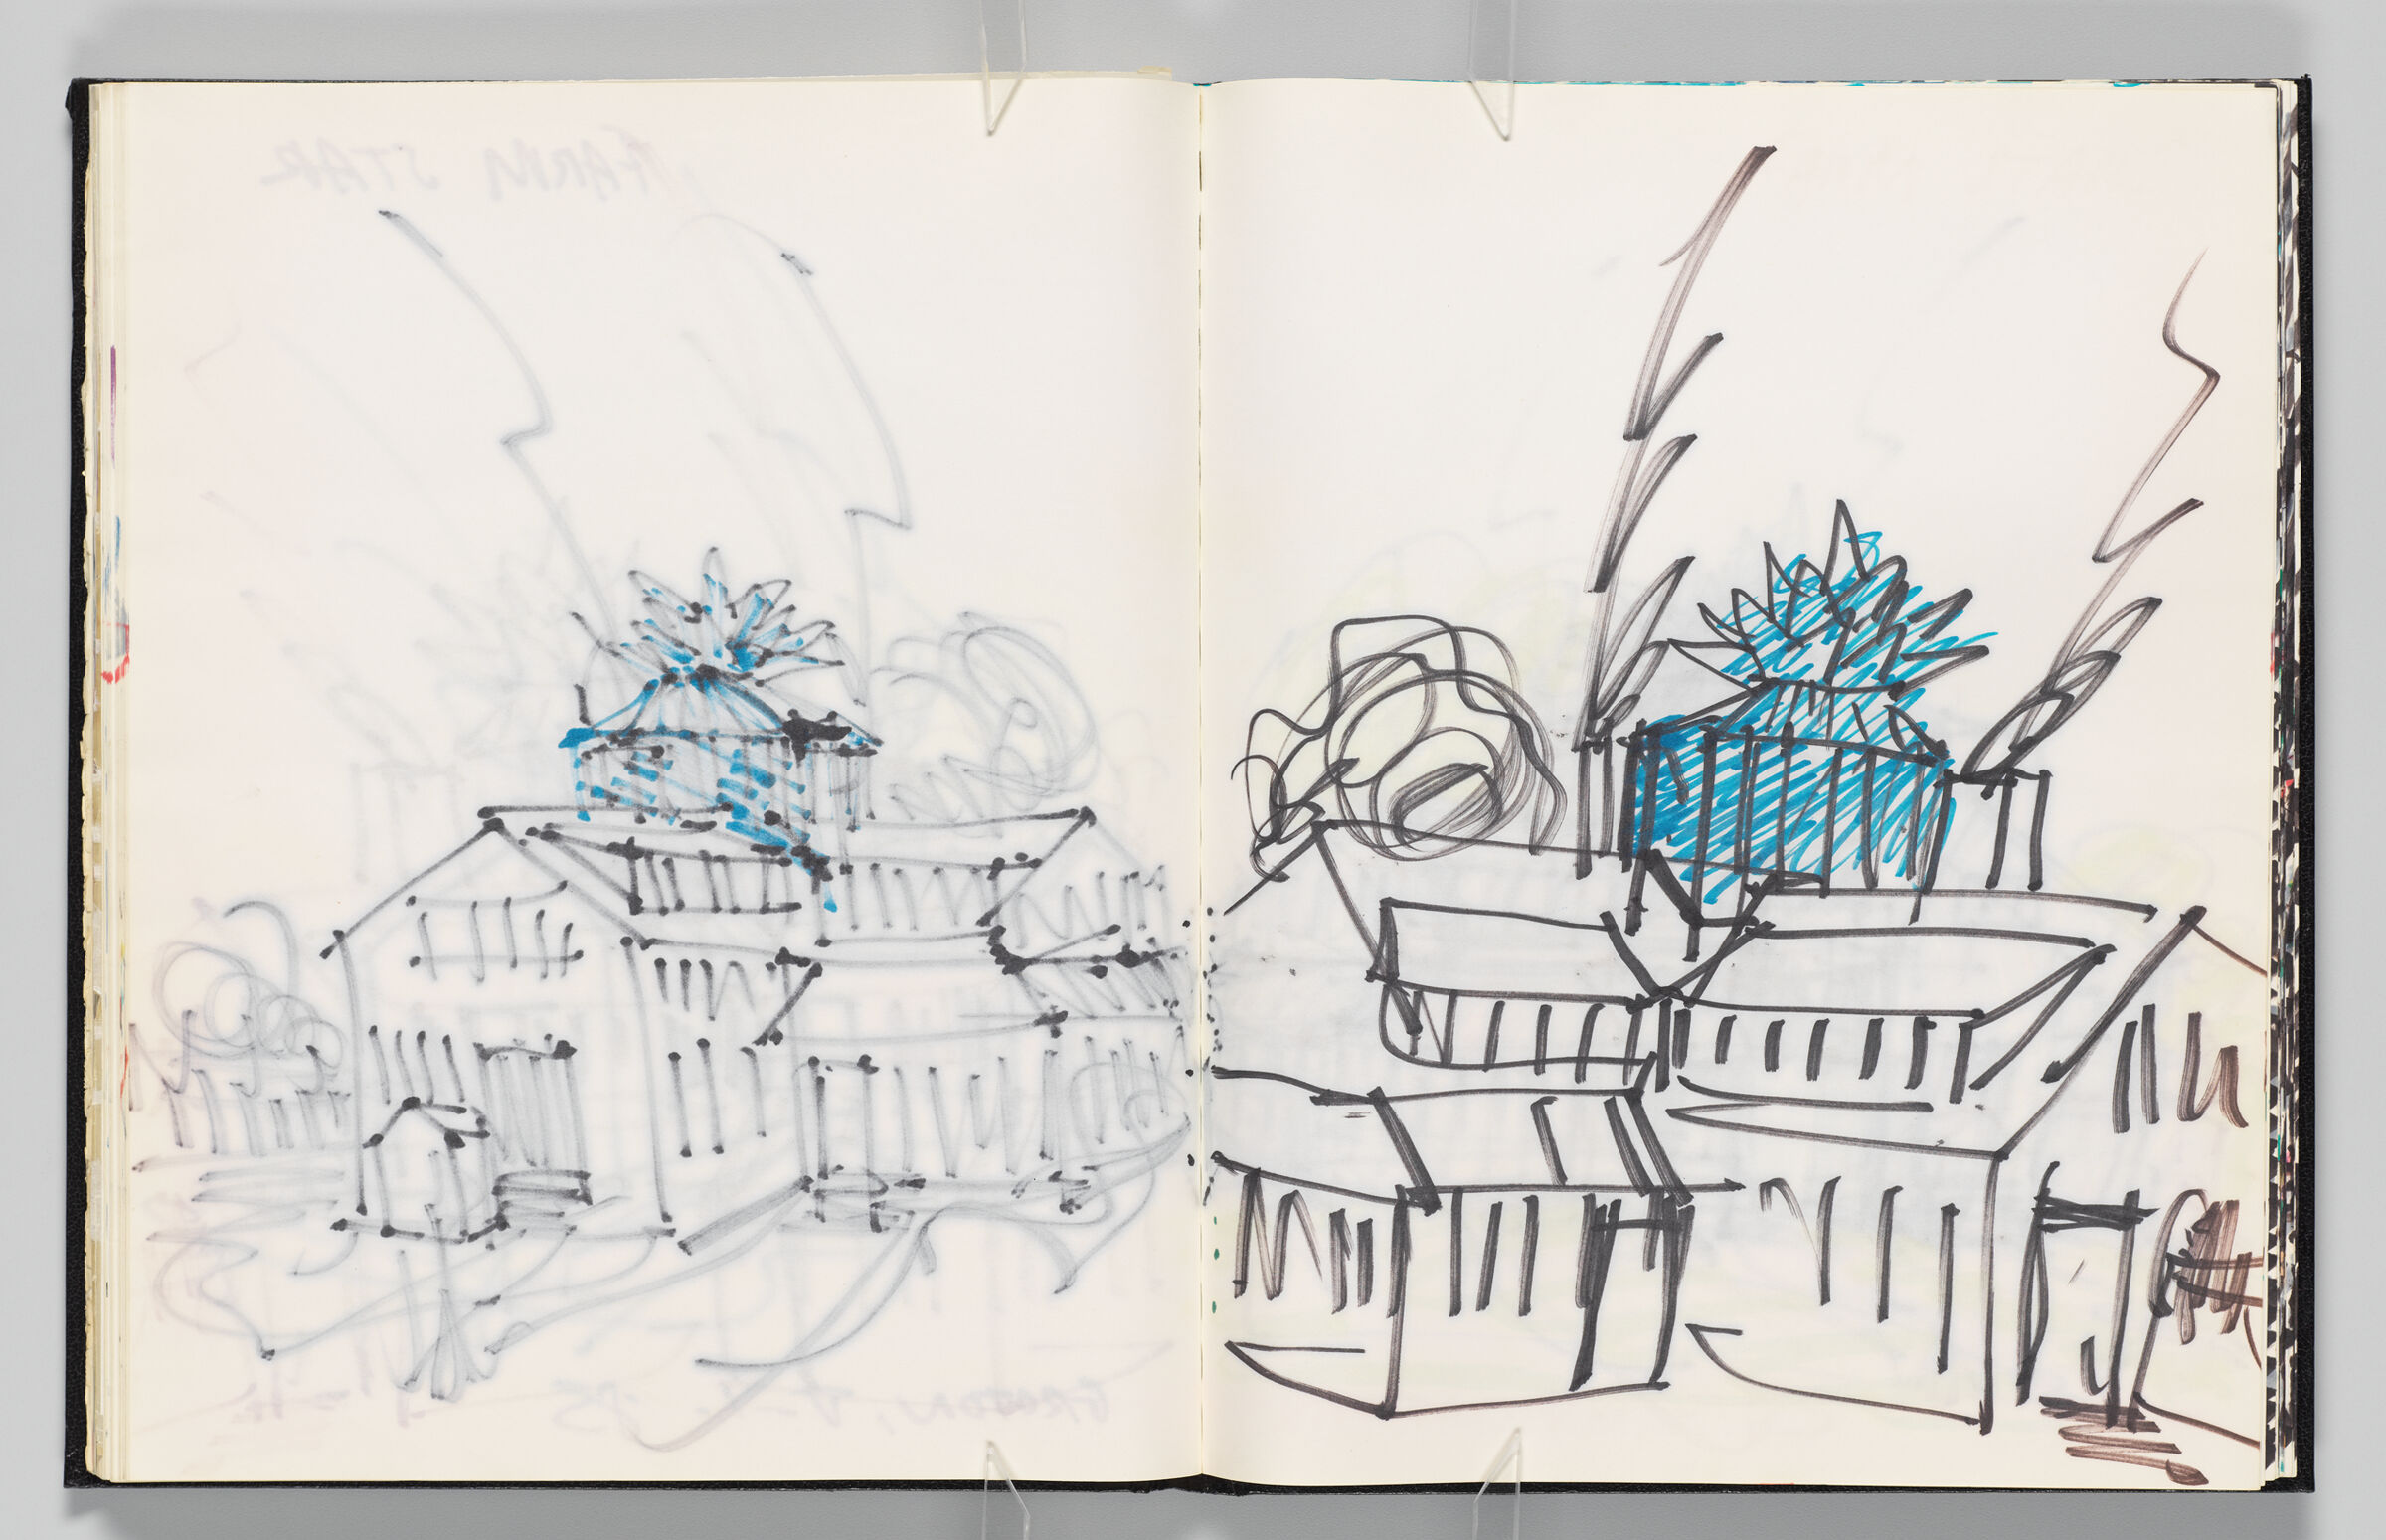 Untitled (Bleed-Through Of Previous Page And Color Transfer, Left Page); Untitled (Groton 